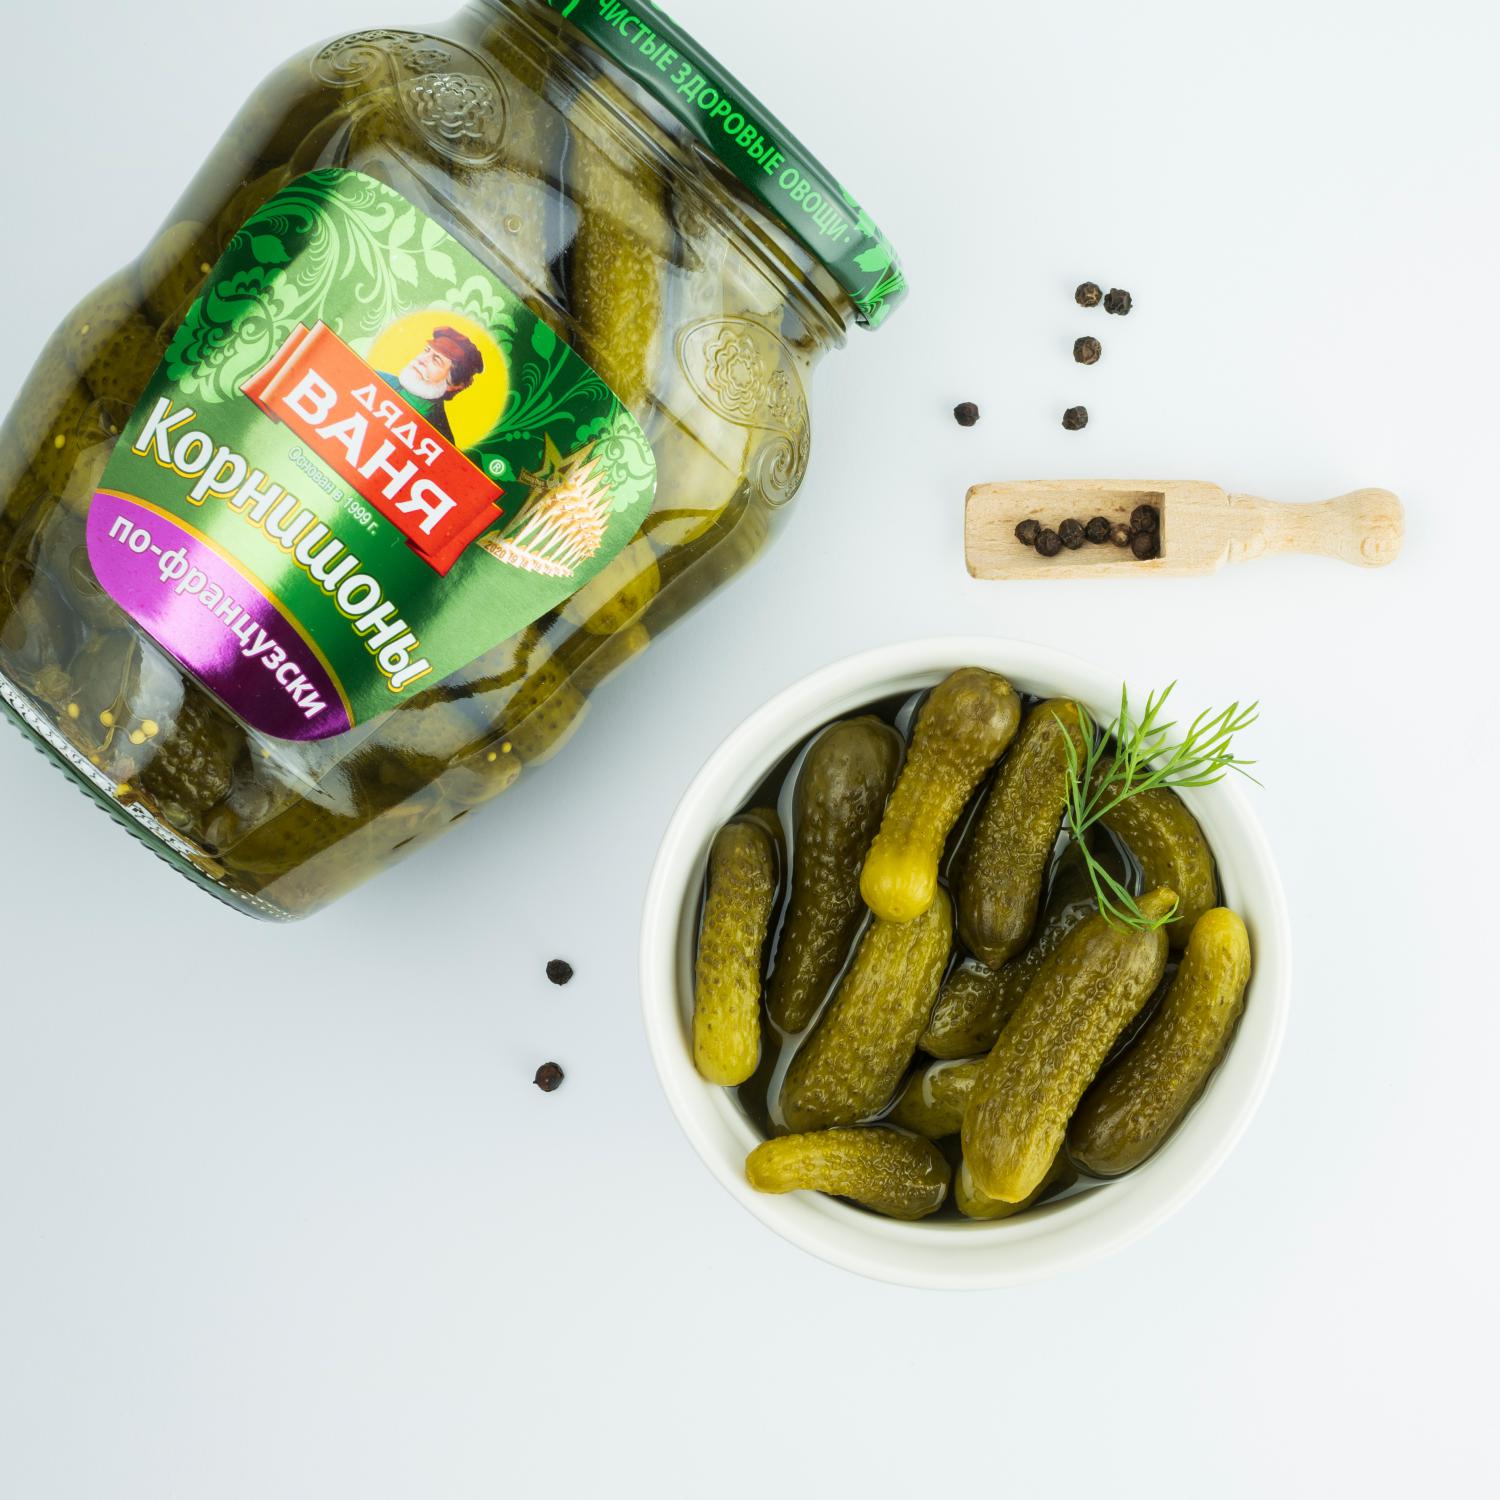 Gherkins french style